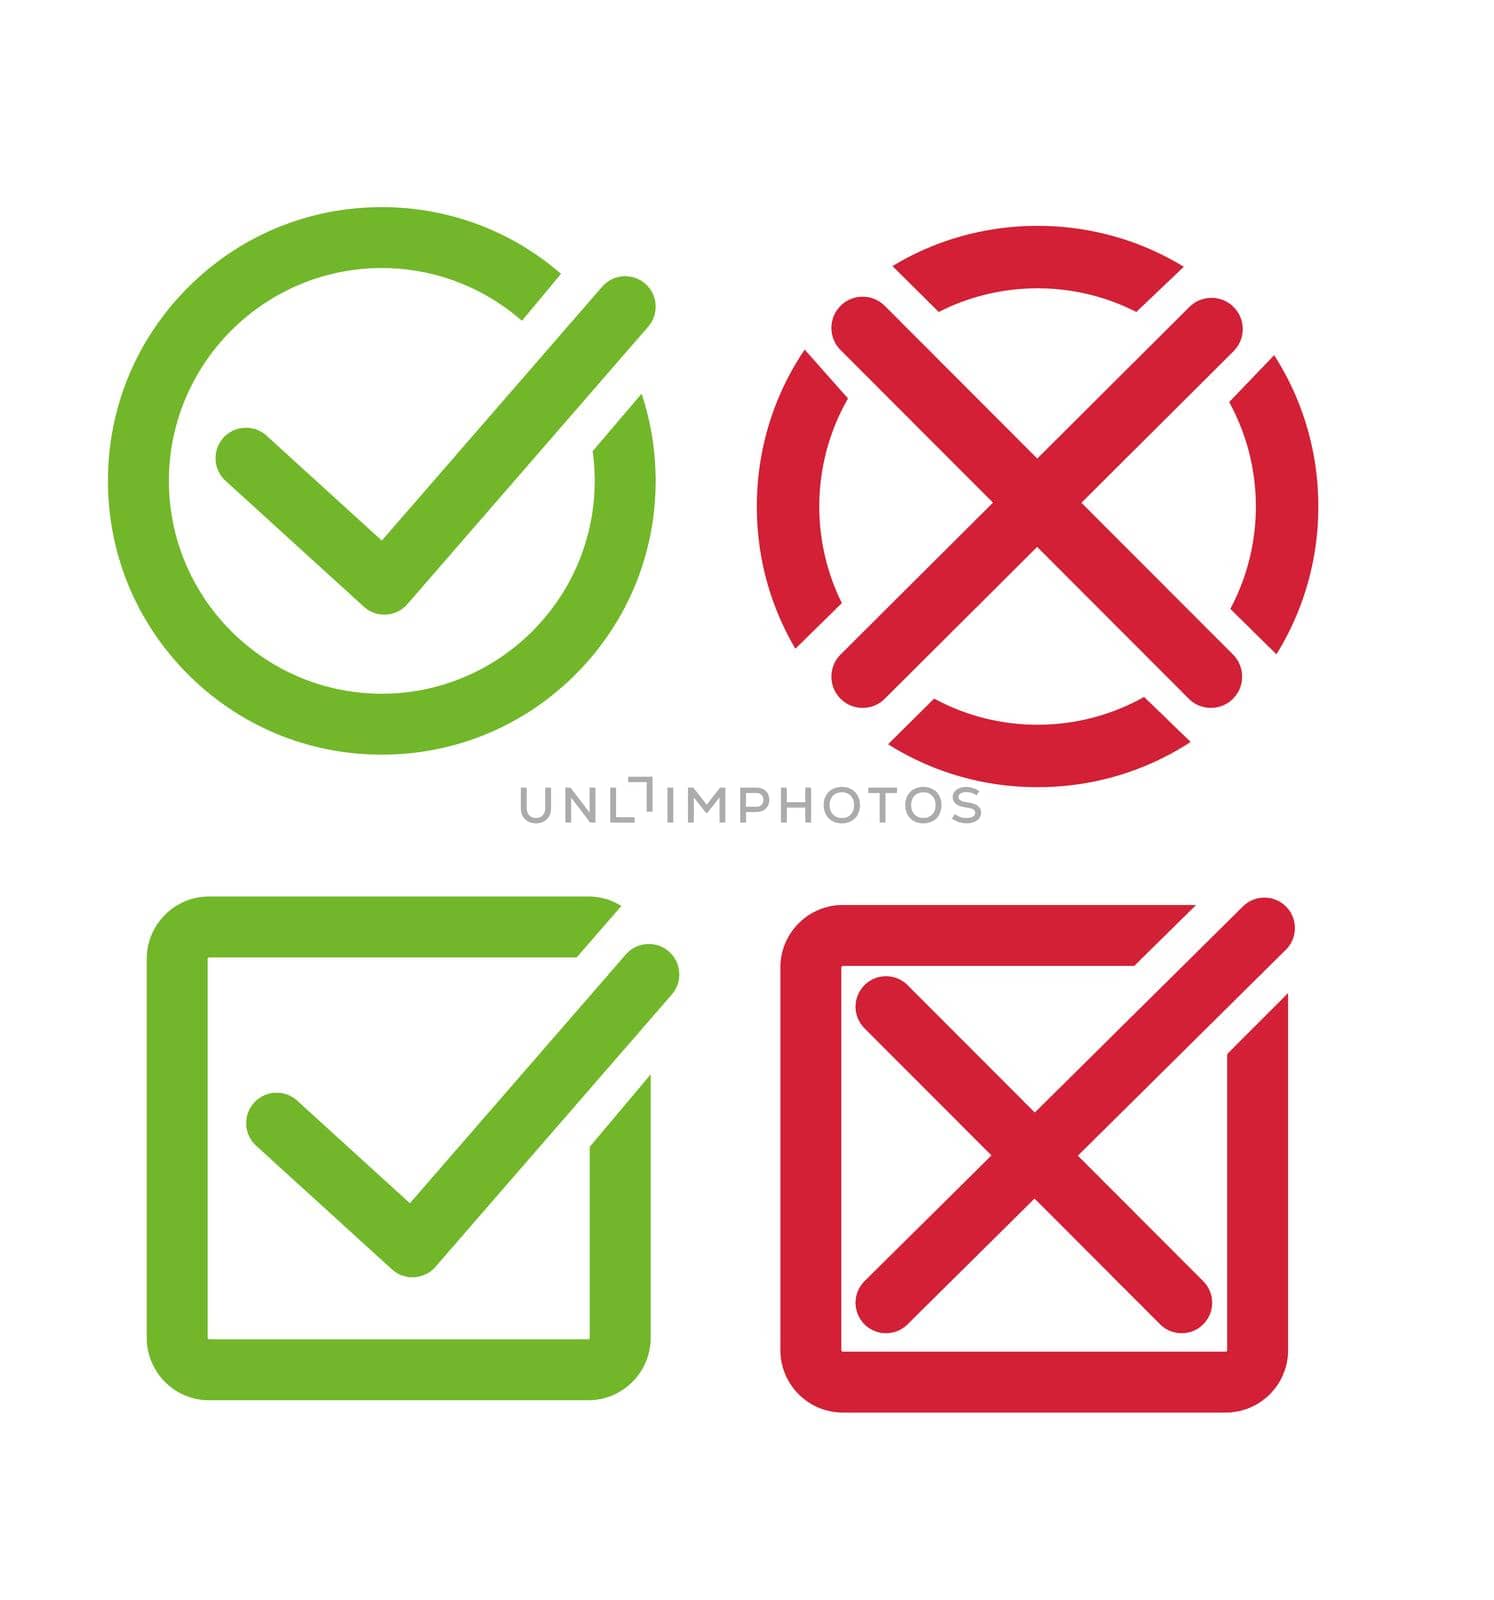 Check mark icon in green and red color set vector illustration isolated on white eps 10